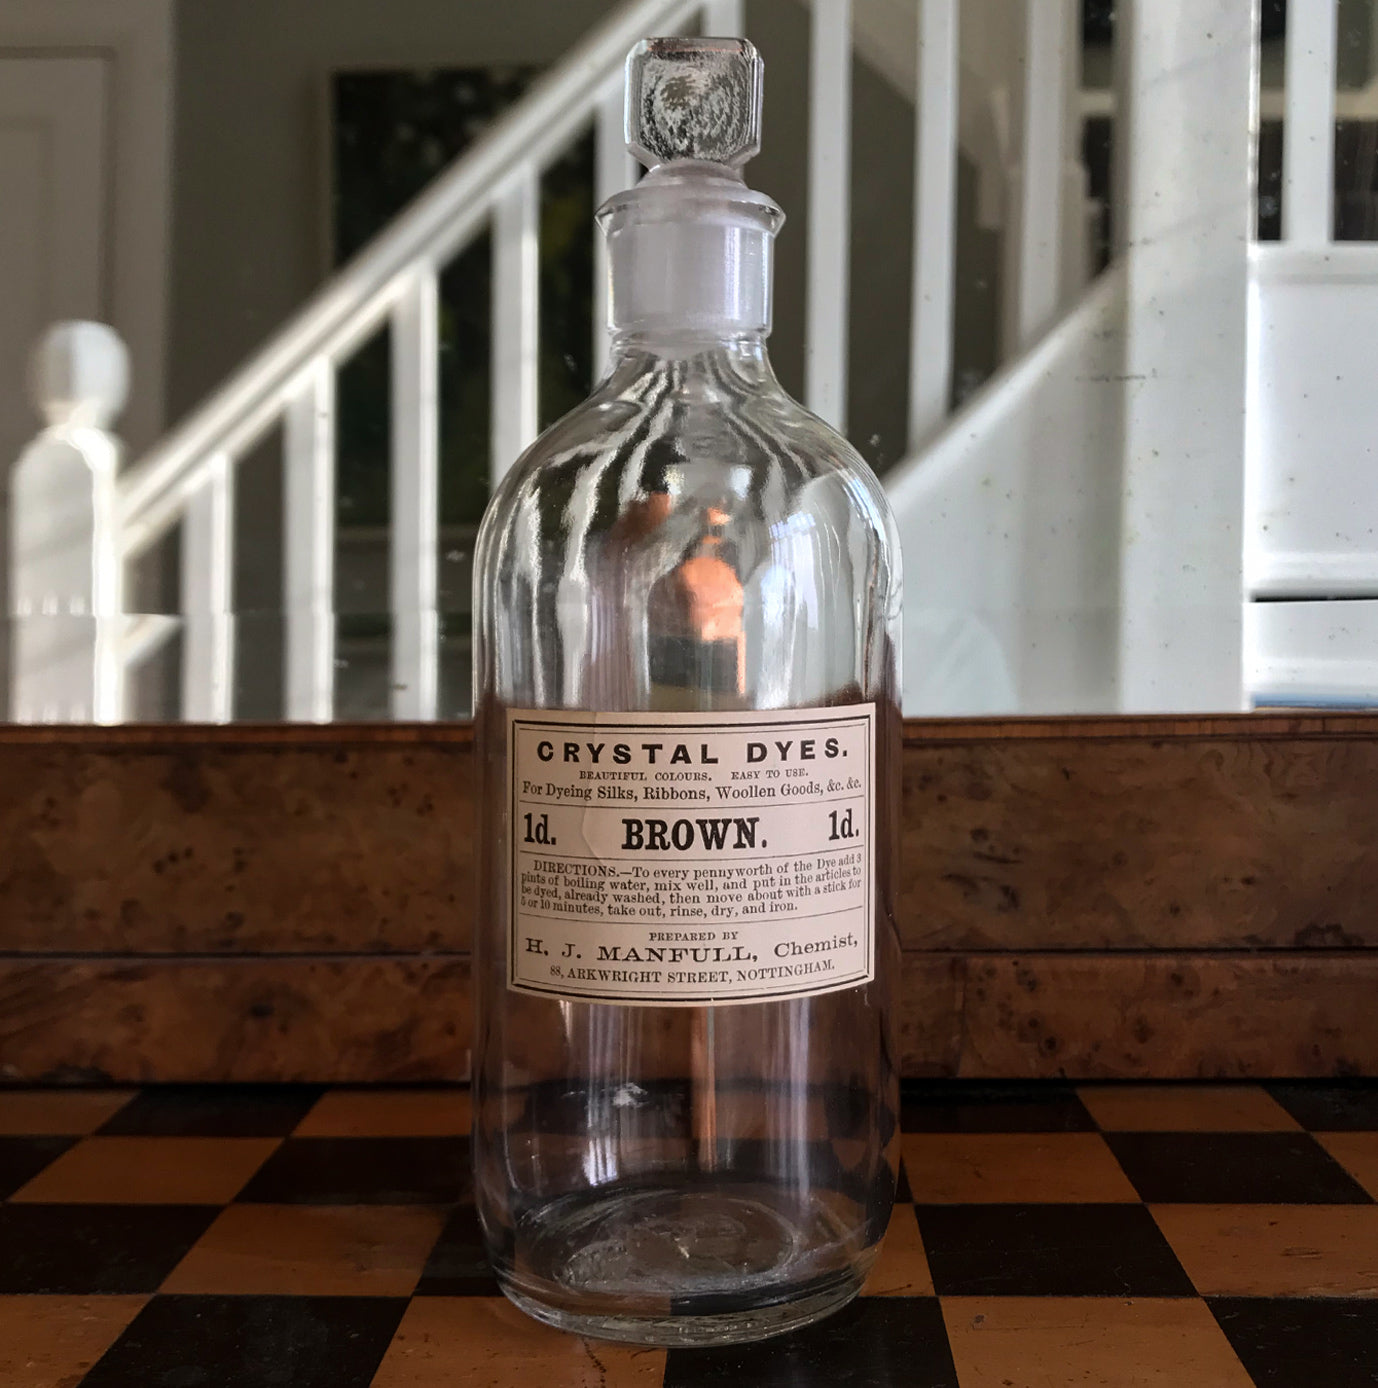 Set of Five Clear Apothecary Bottles with original Crystal Dyes paper labels from The H. J Manfull Chemist, 88 Arkwright Street, Nottingham - SHOP NOW - www.intovintage.co.uk